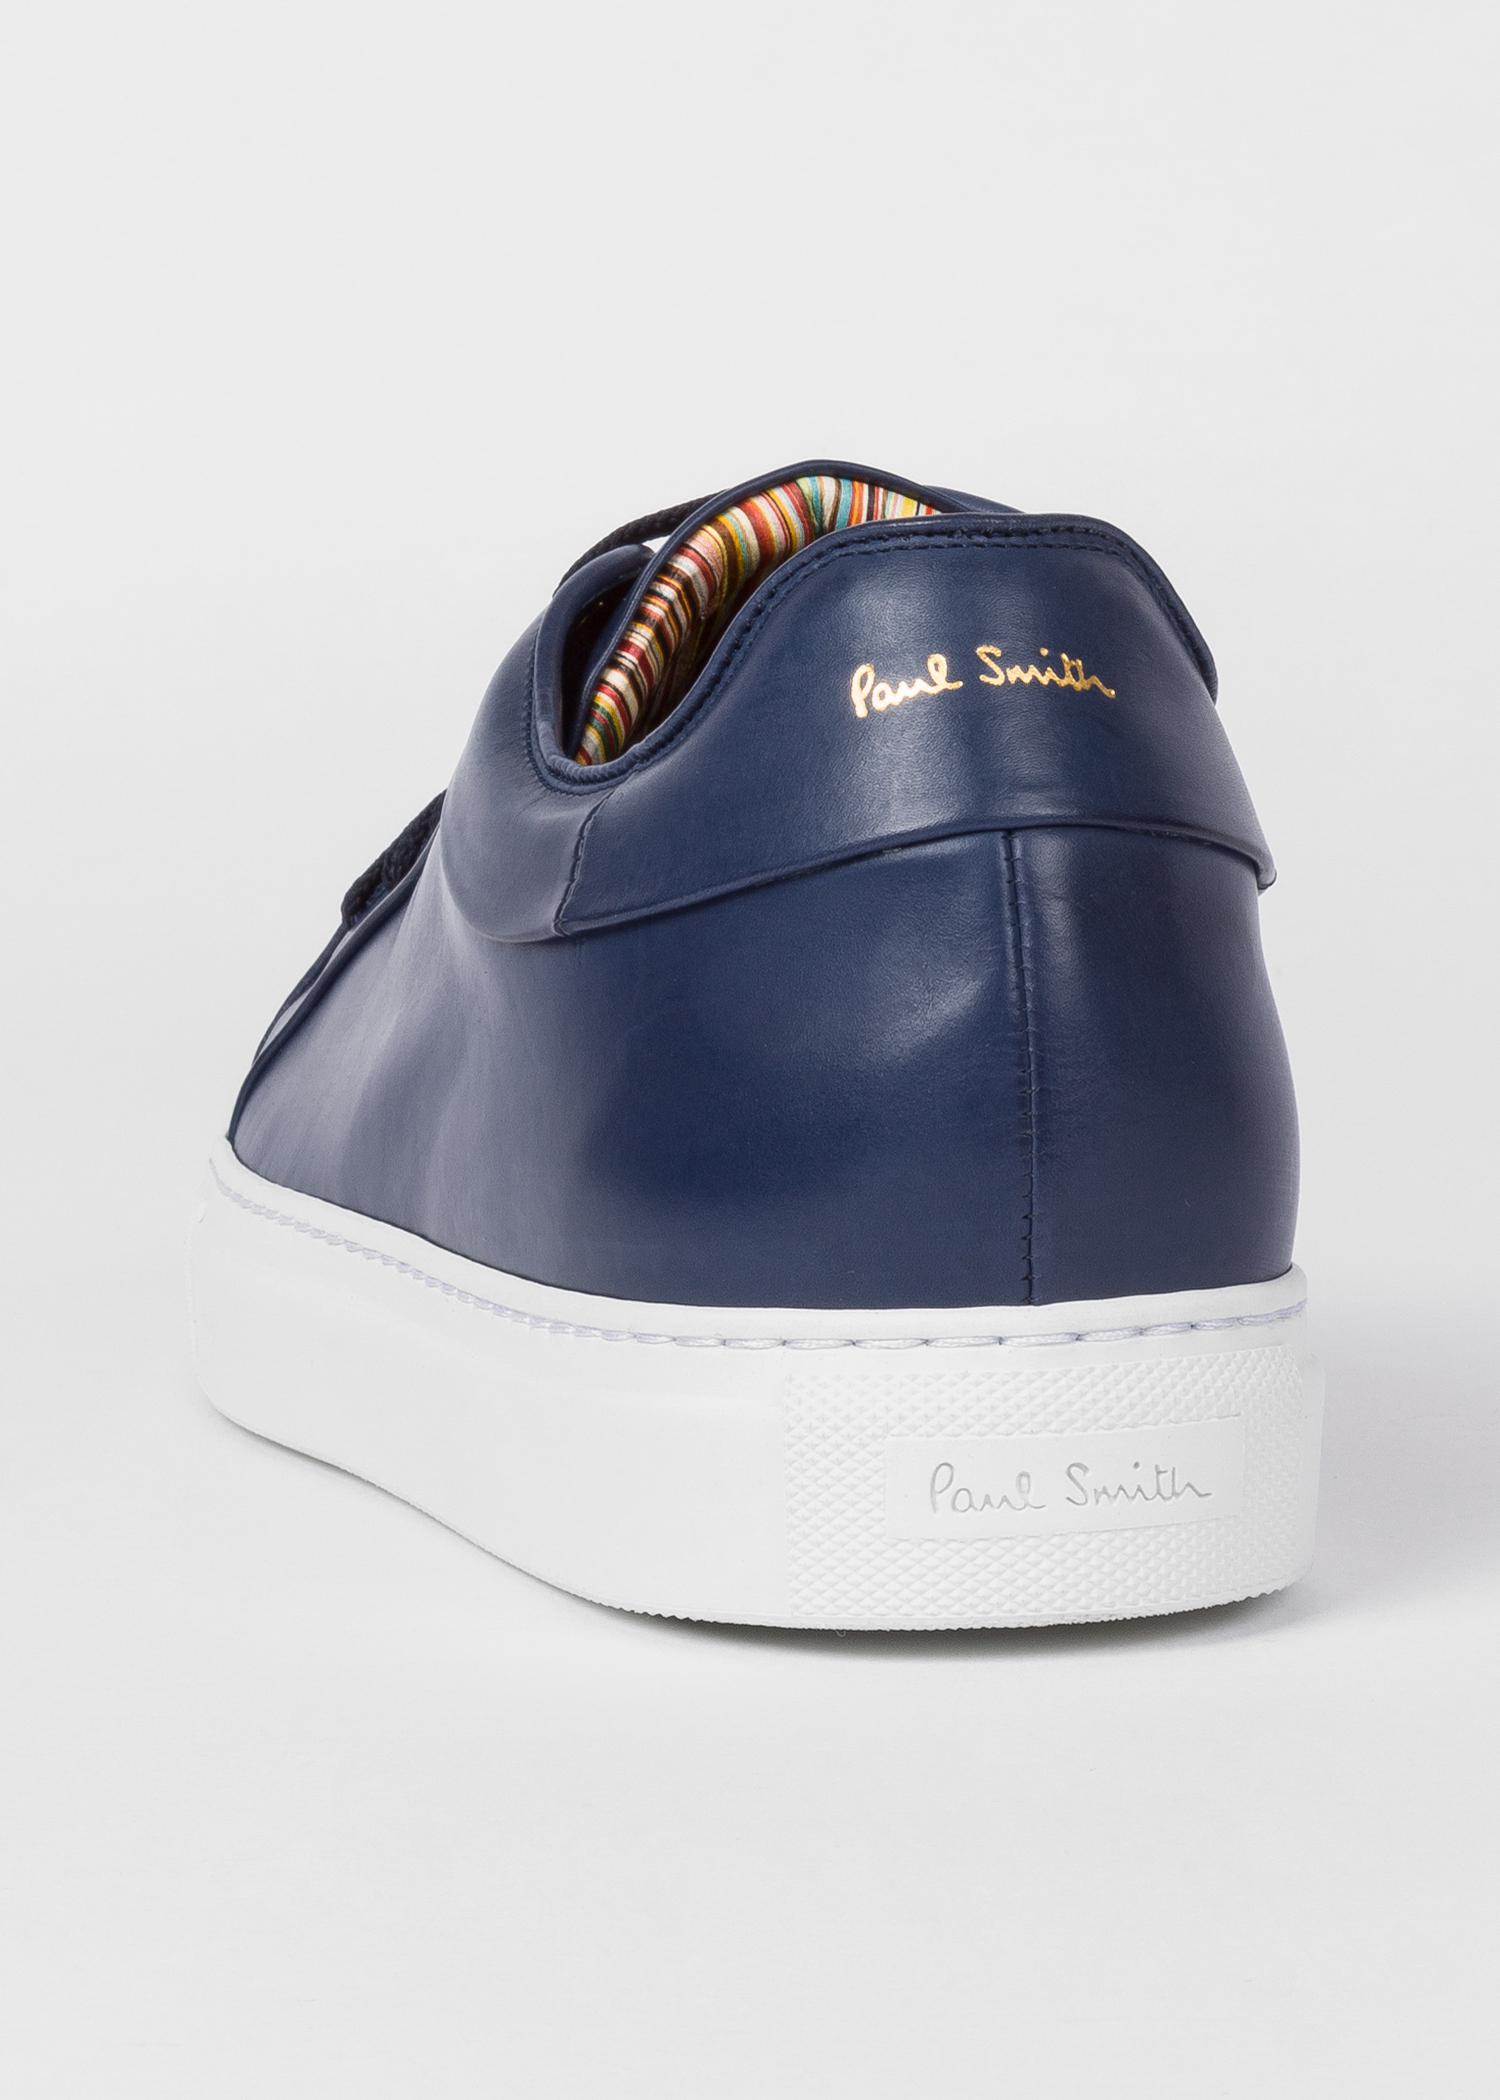 paul smith blue trainers